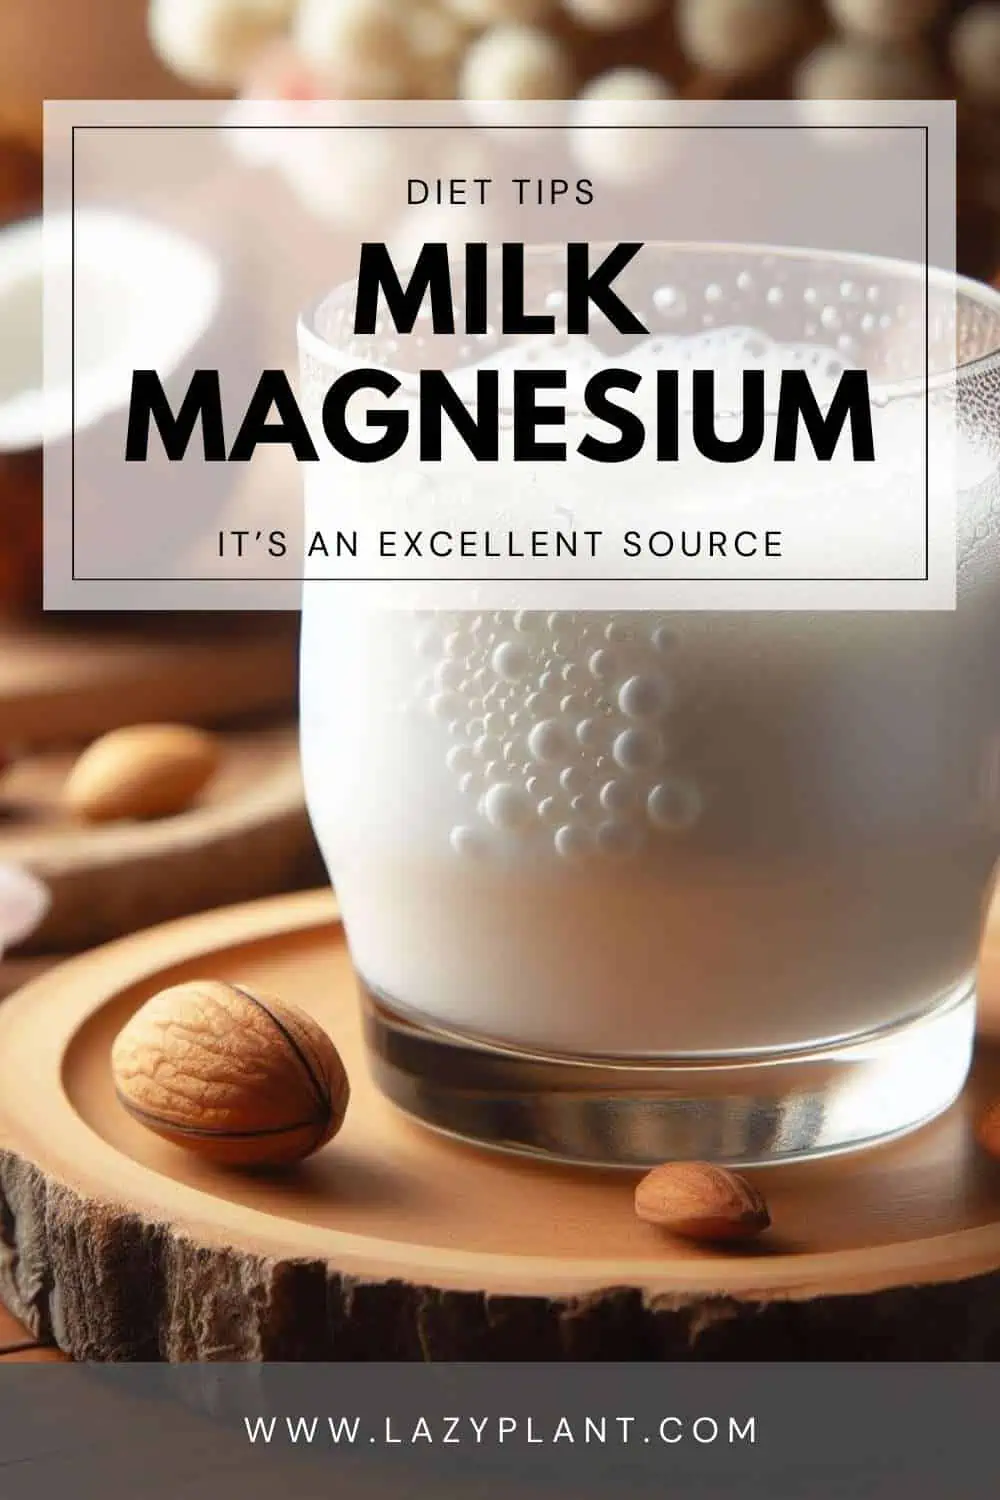 Magnesium concentrations in dairy